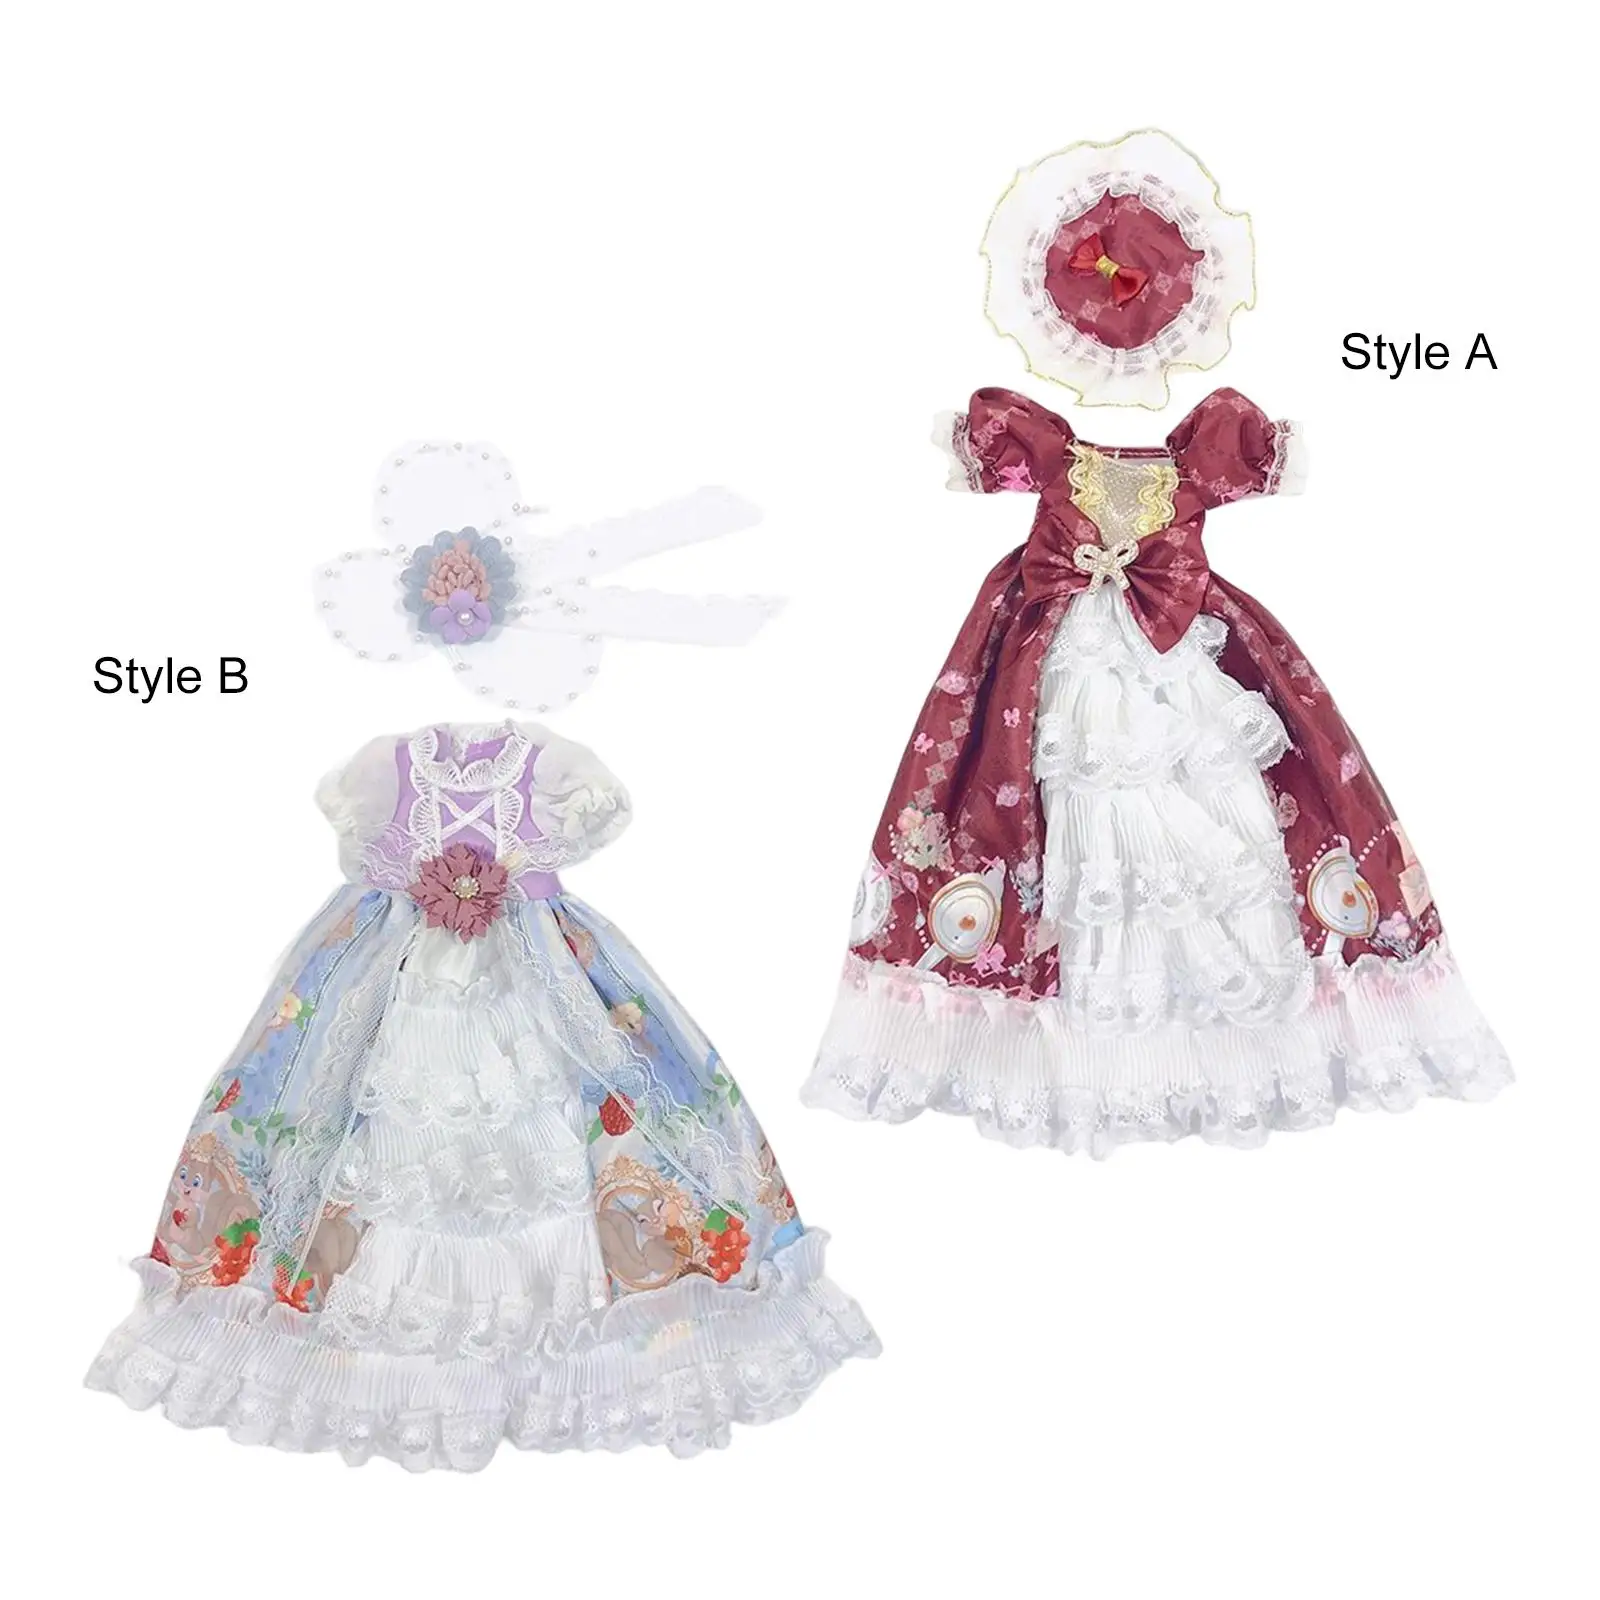 Doll Clothes Dress Set Baby Doll Clothes Dress for 12 inch Dolls Dress up Accessory